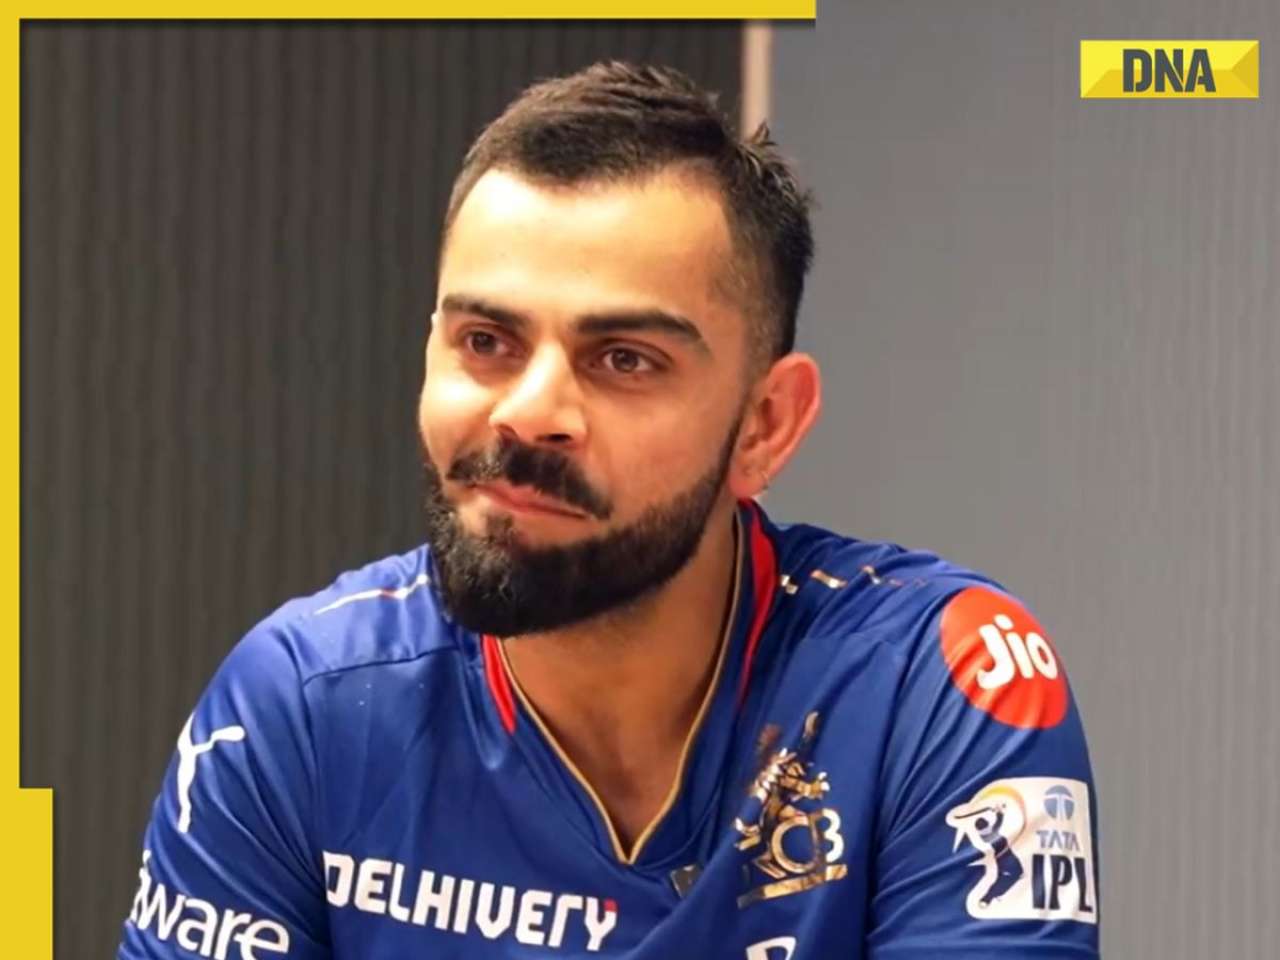 'Said nice things about you....': RCB tease Virat Kohli with friend 'Sunil' reference, his reaction goes viral